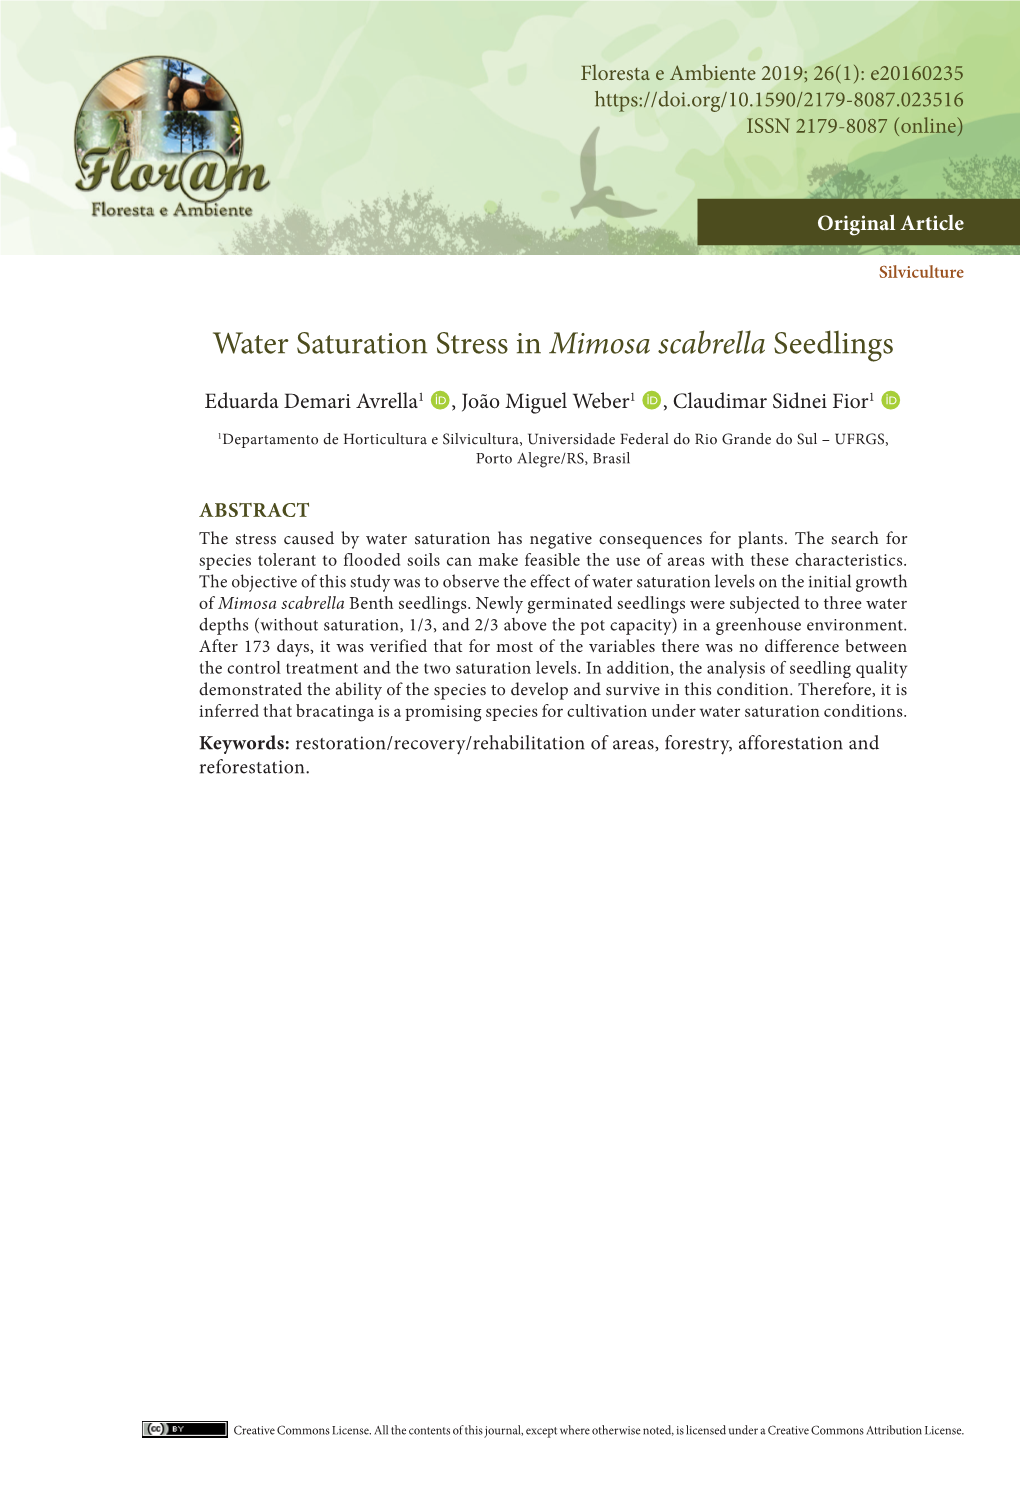 Water Saturation Stress in Mimosa Scabrella Seedlings